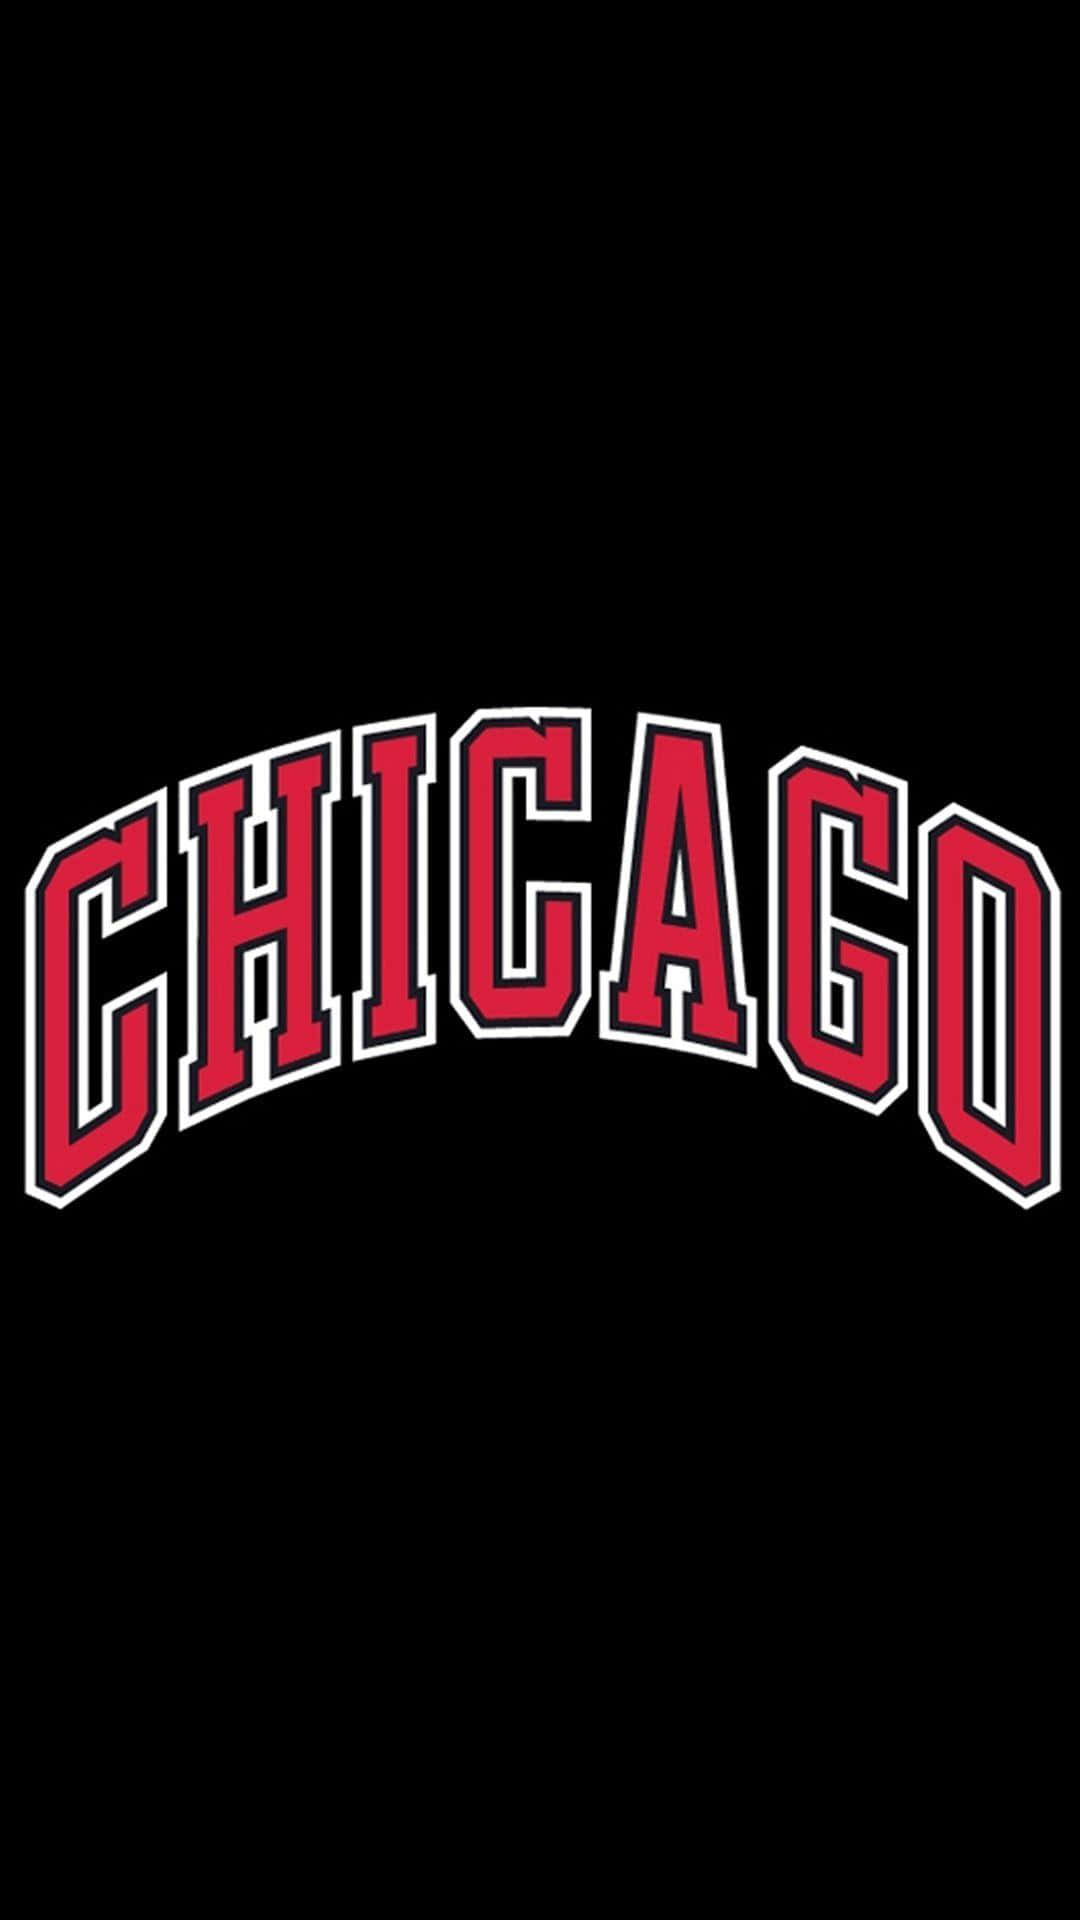 Show Your Chicago Bulls Pride with this Distinctive Iphone Wallpaper